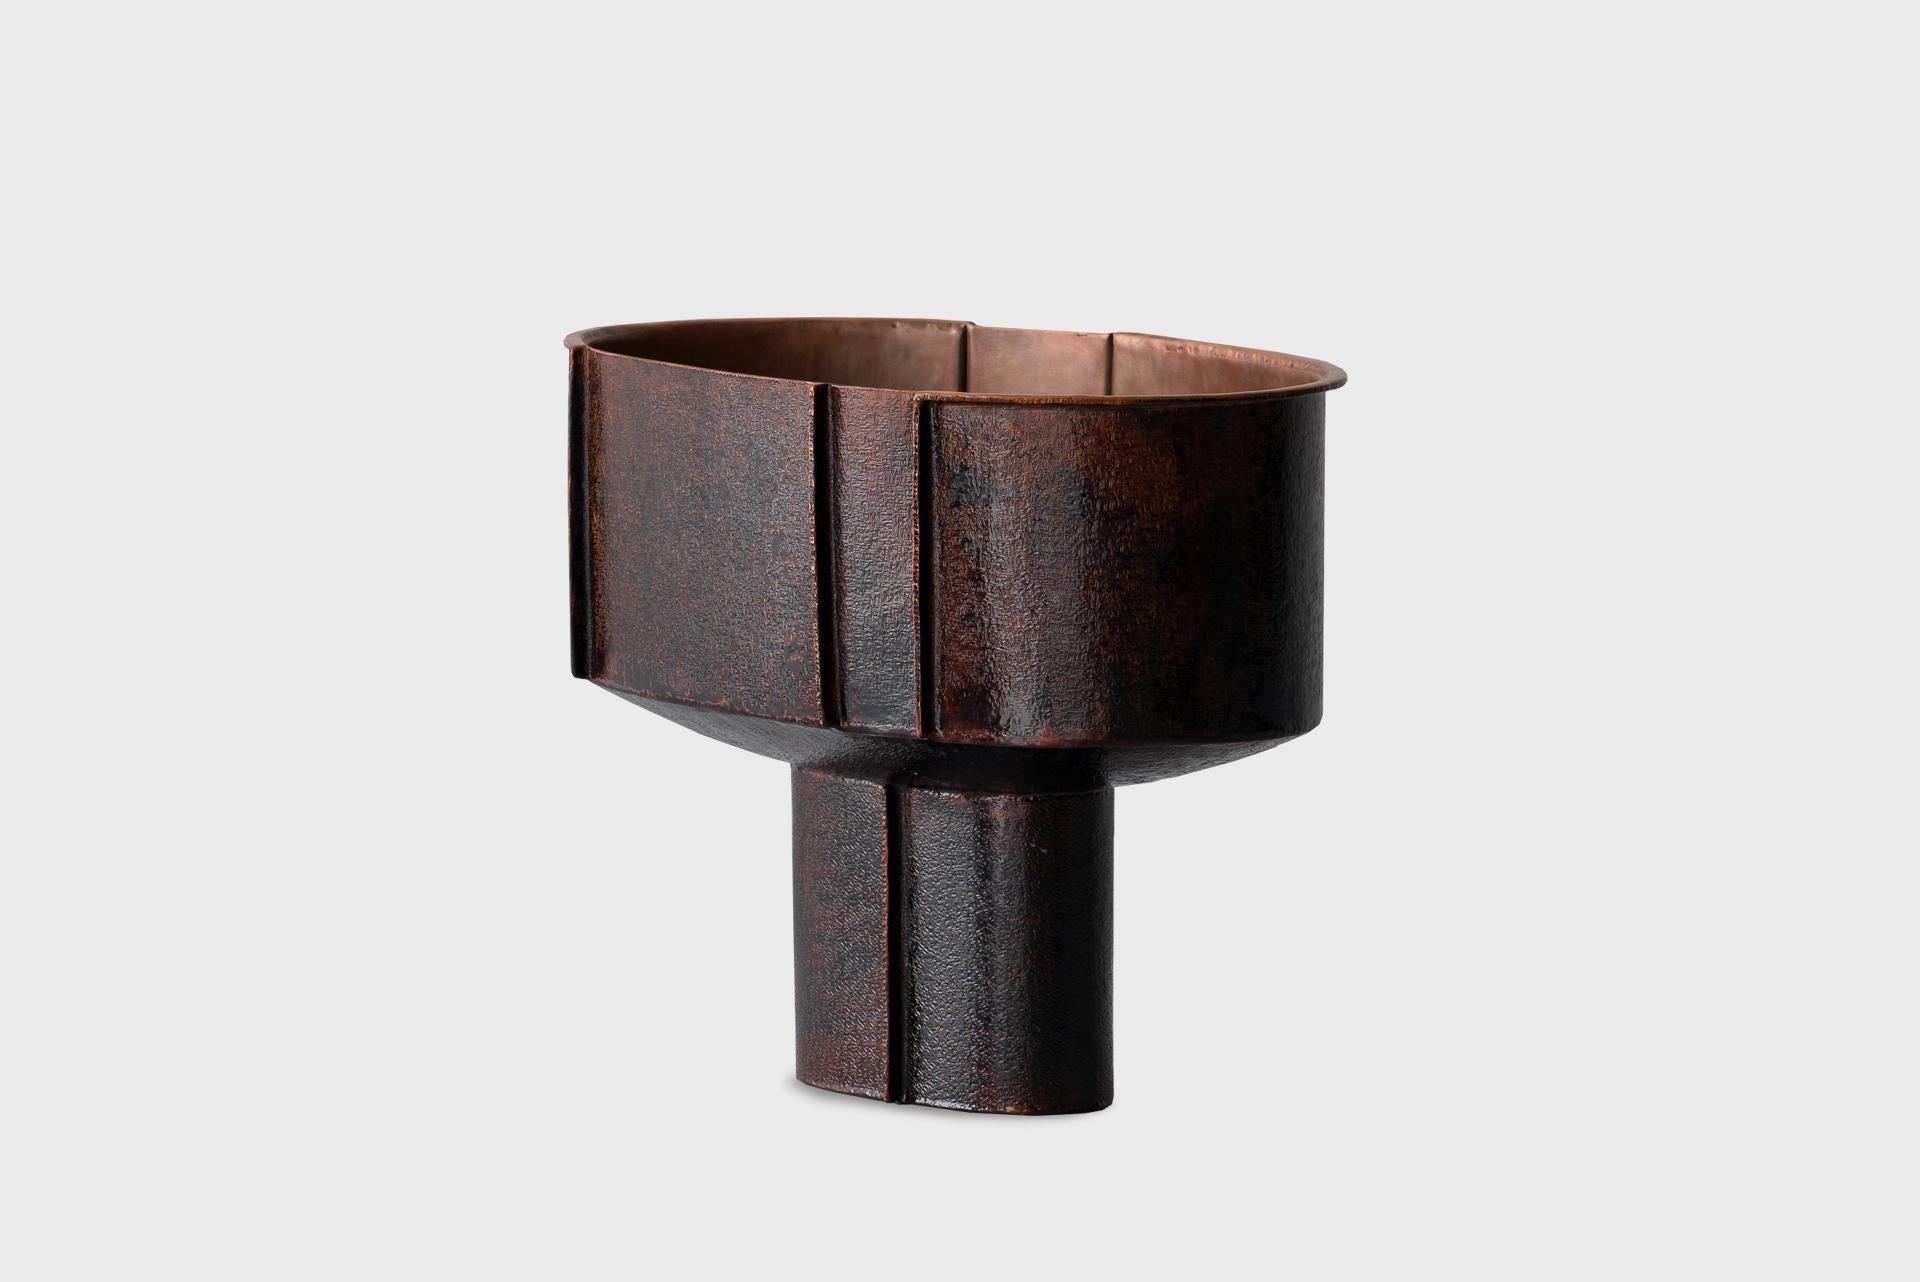 Contemporary Copper Vase 1, Textured Natural Dark Lacquer, Seung Hyun Lee, Korea In New Condition For Sale In Barcelona, ES